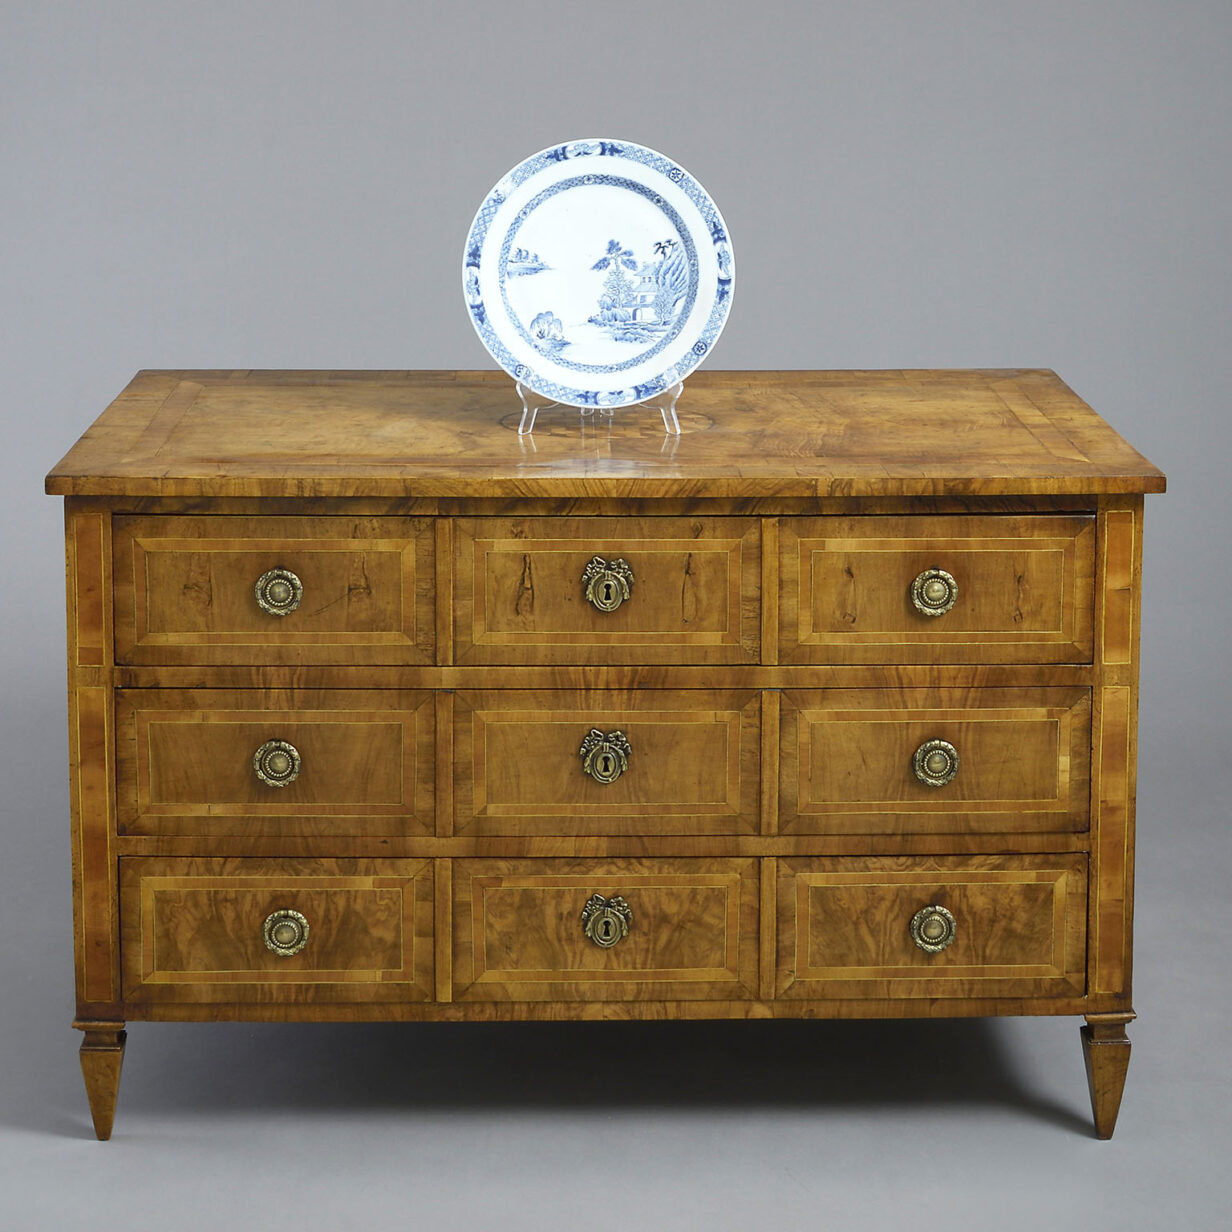 Late 18th century parquetry walnut commode